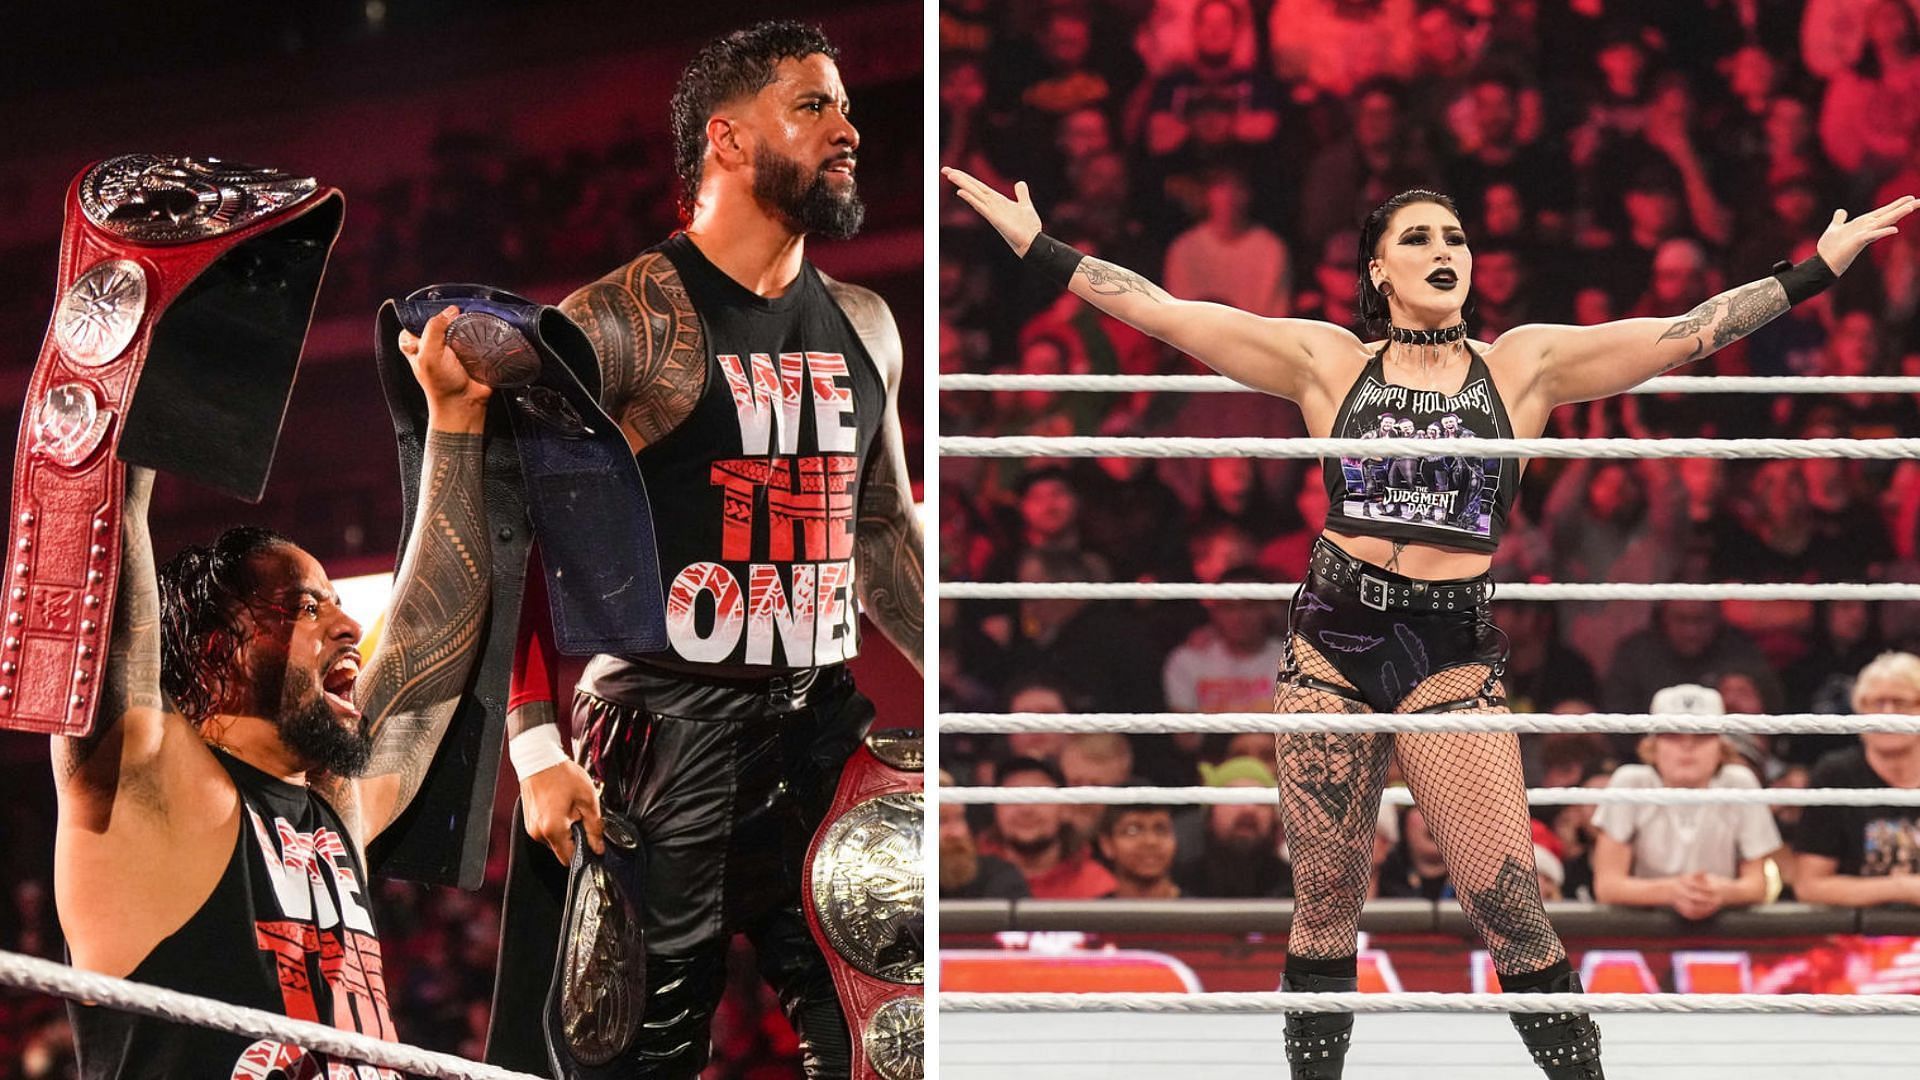 WWE RAW ratings rise for the final live episode of the year